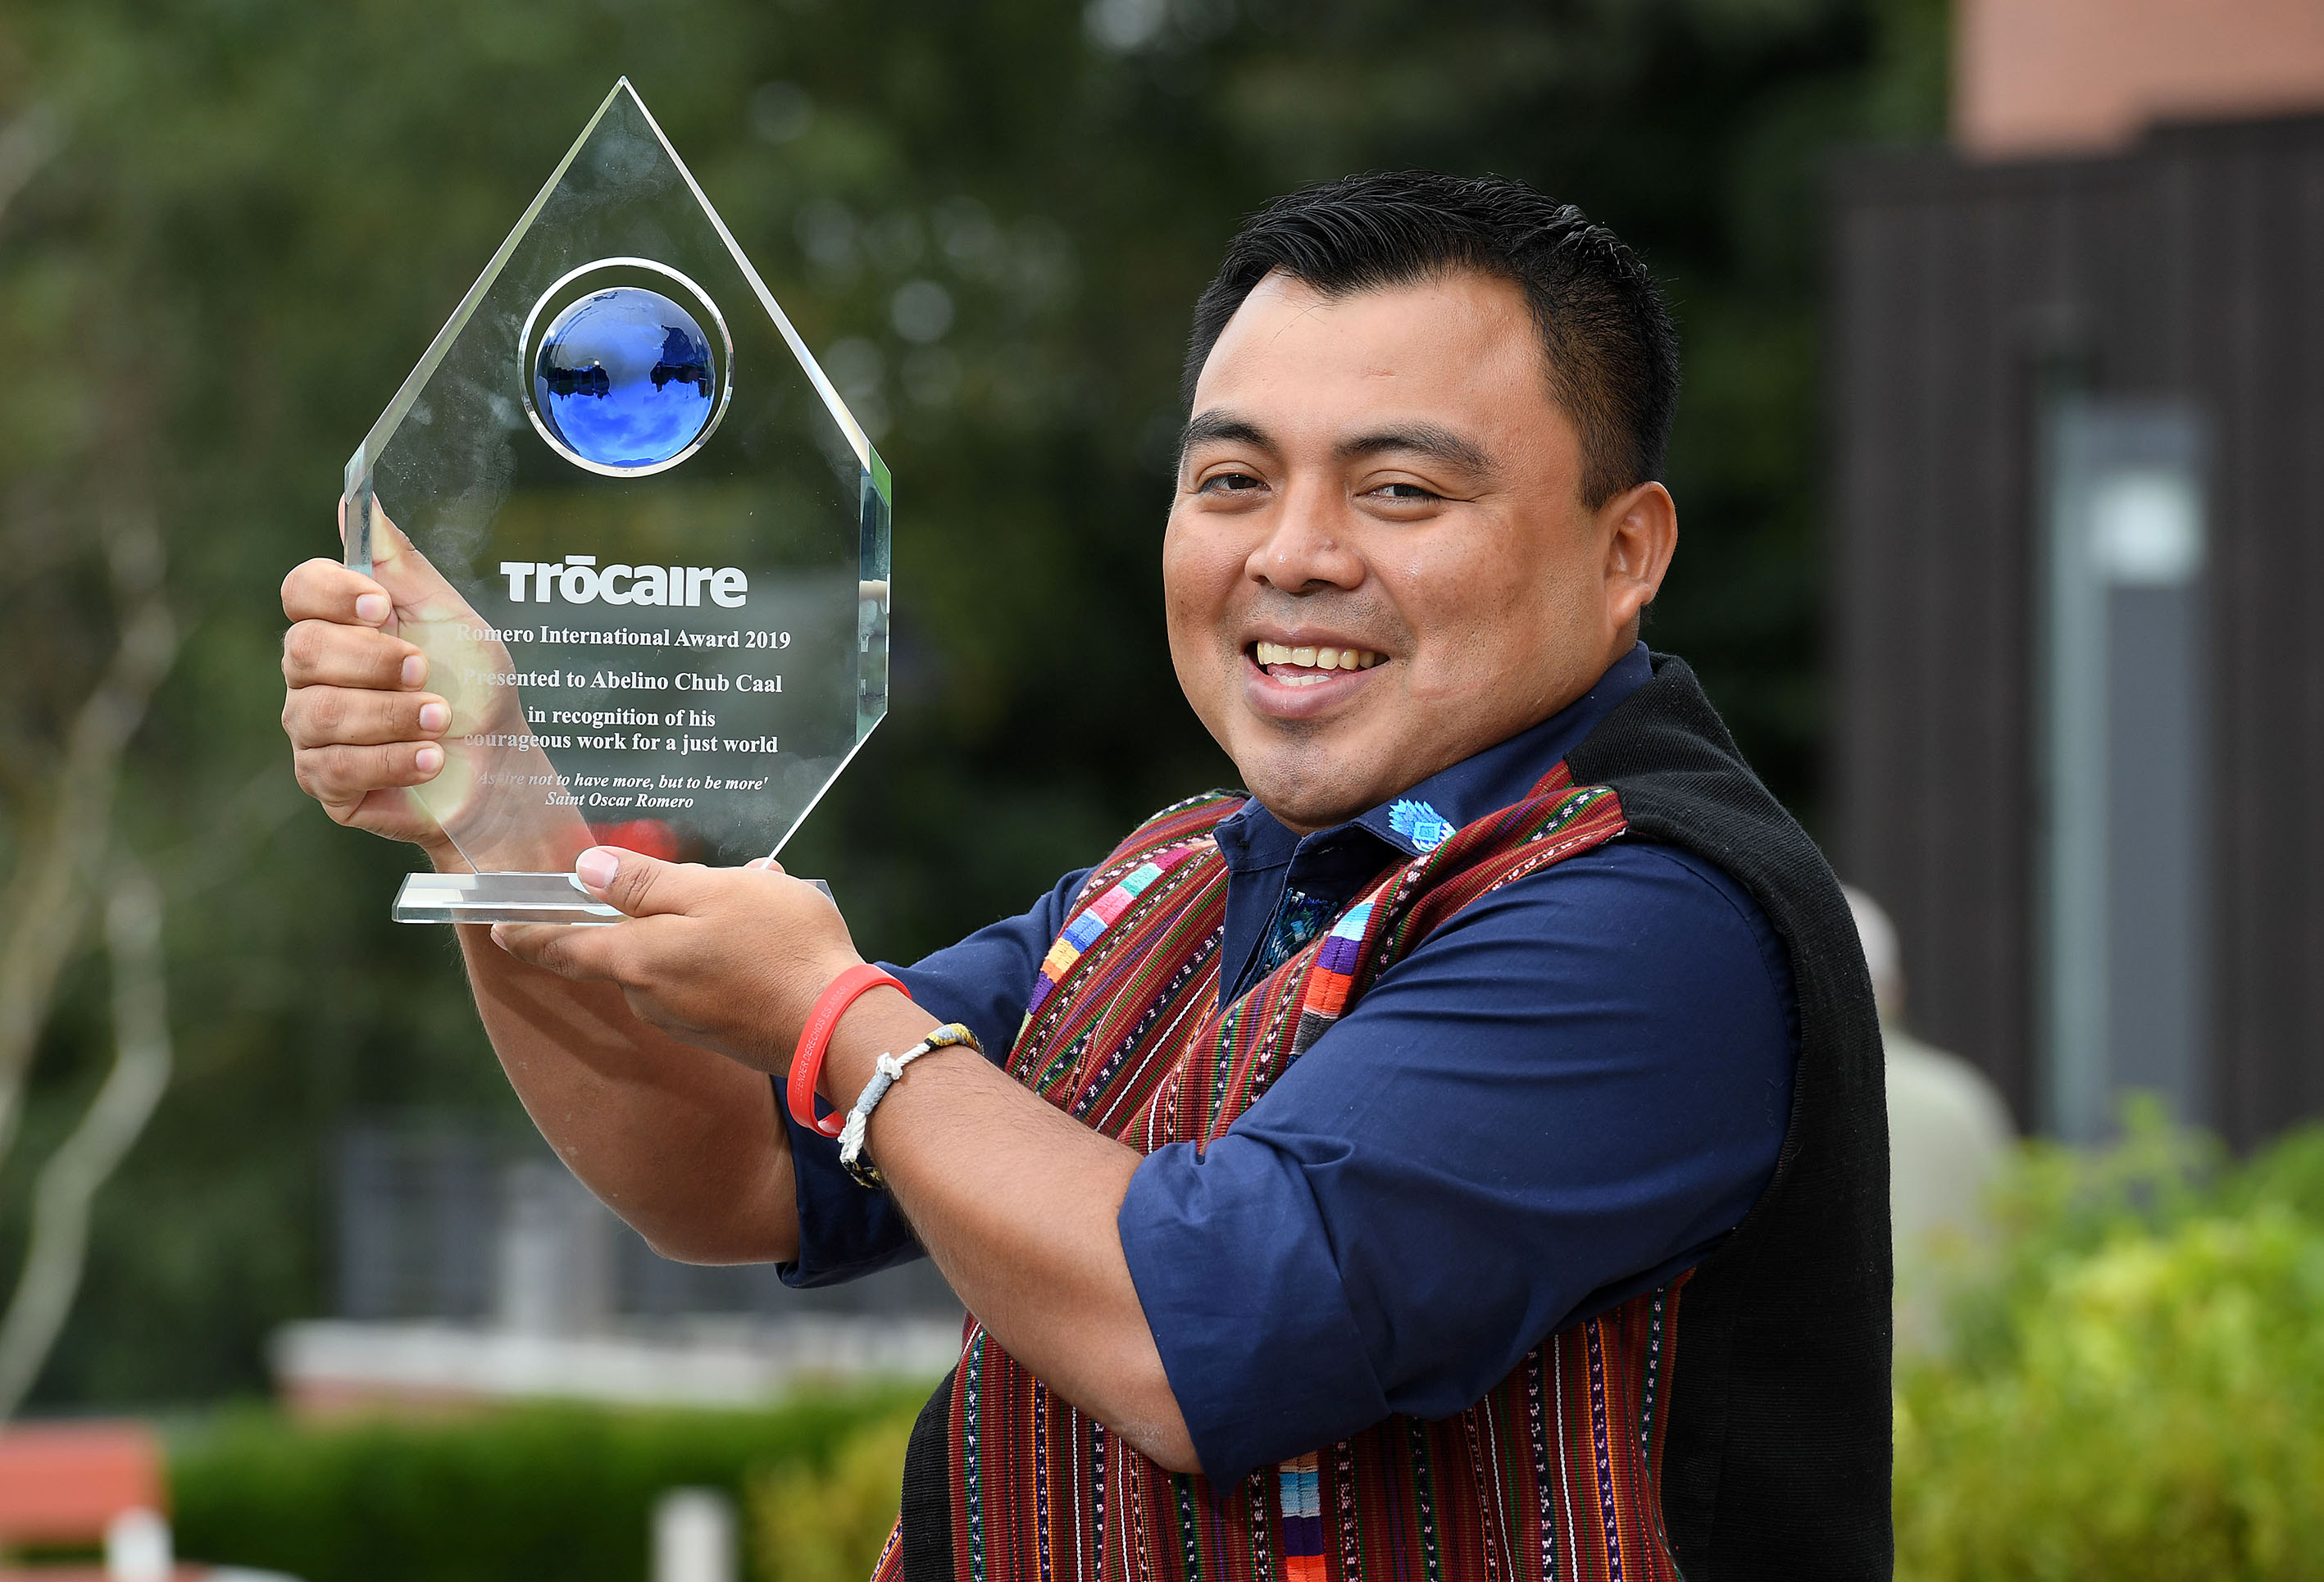 RECOGNITION: Abeline Chub Caal with his Trócaire award\n